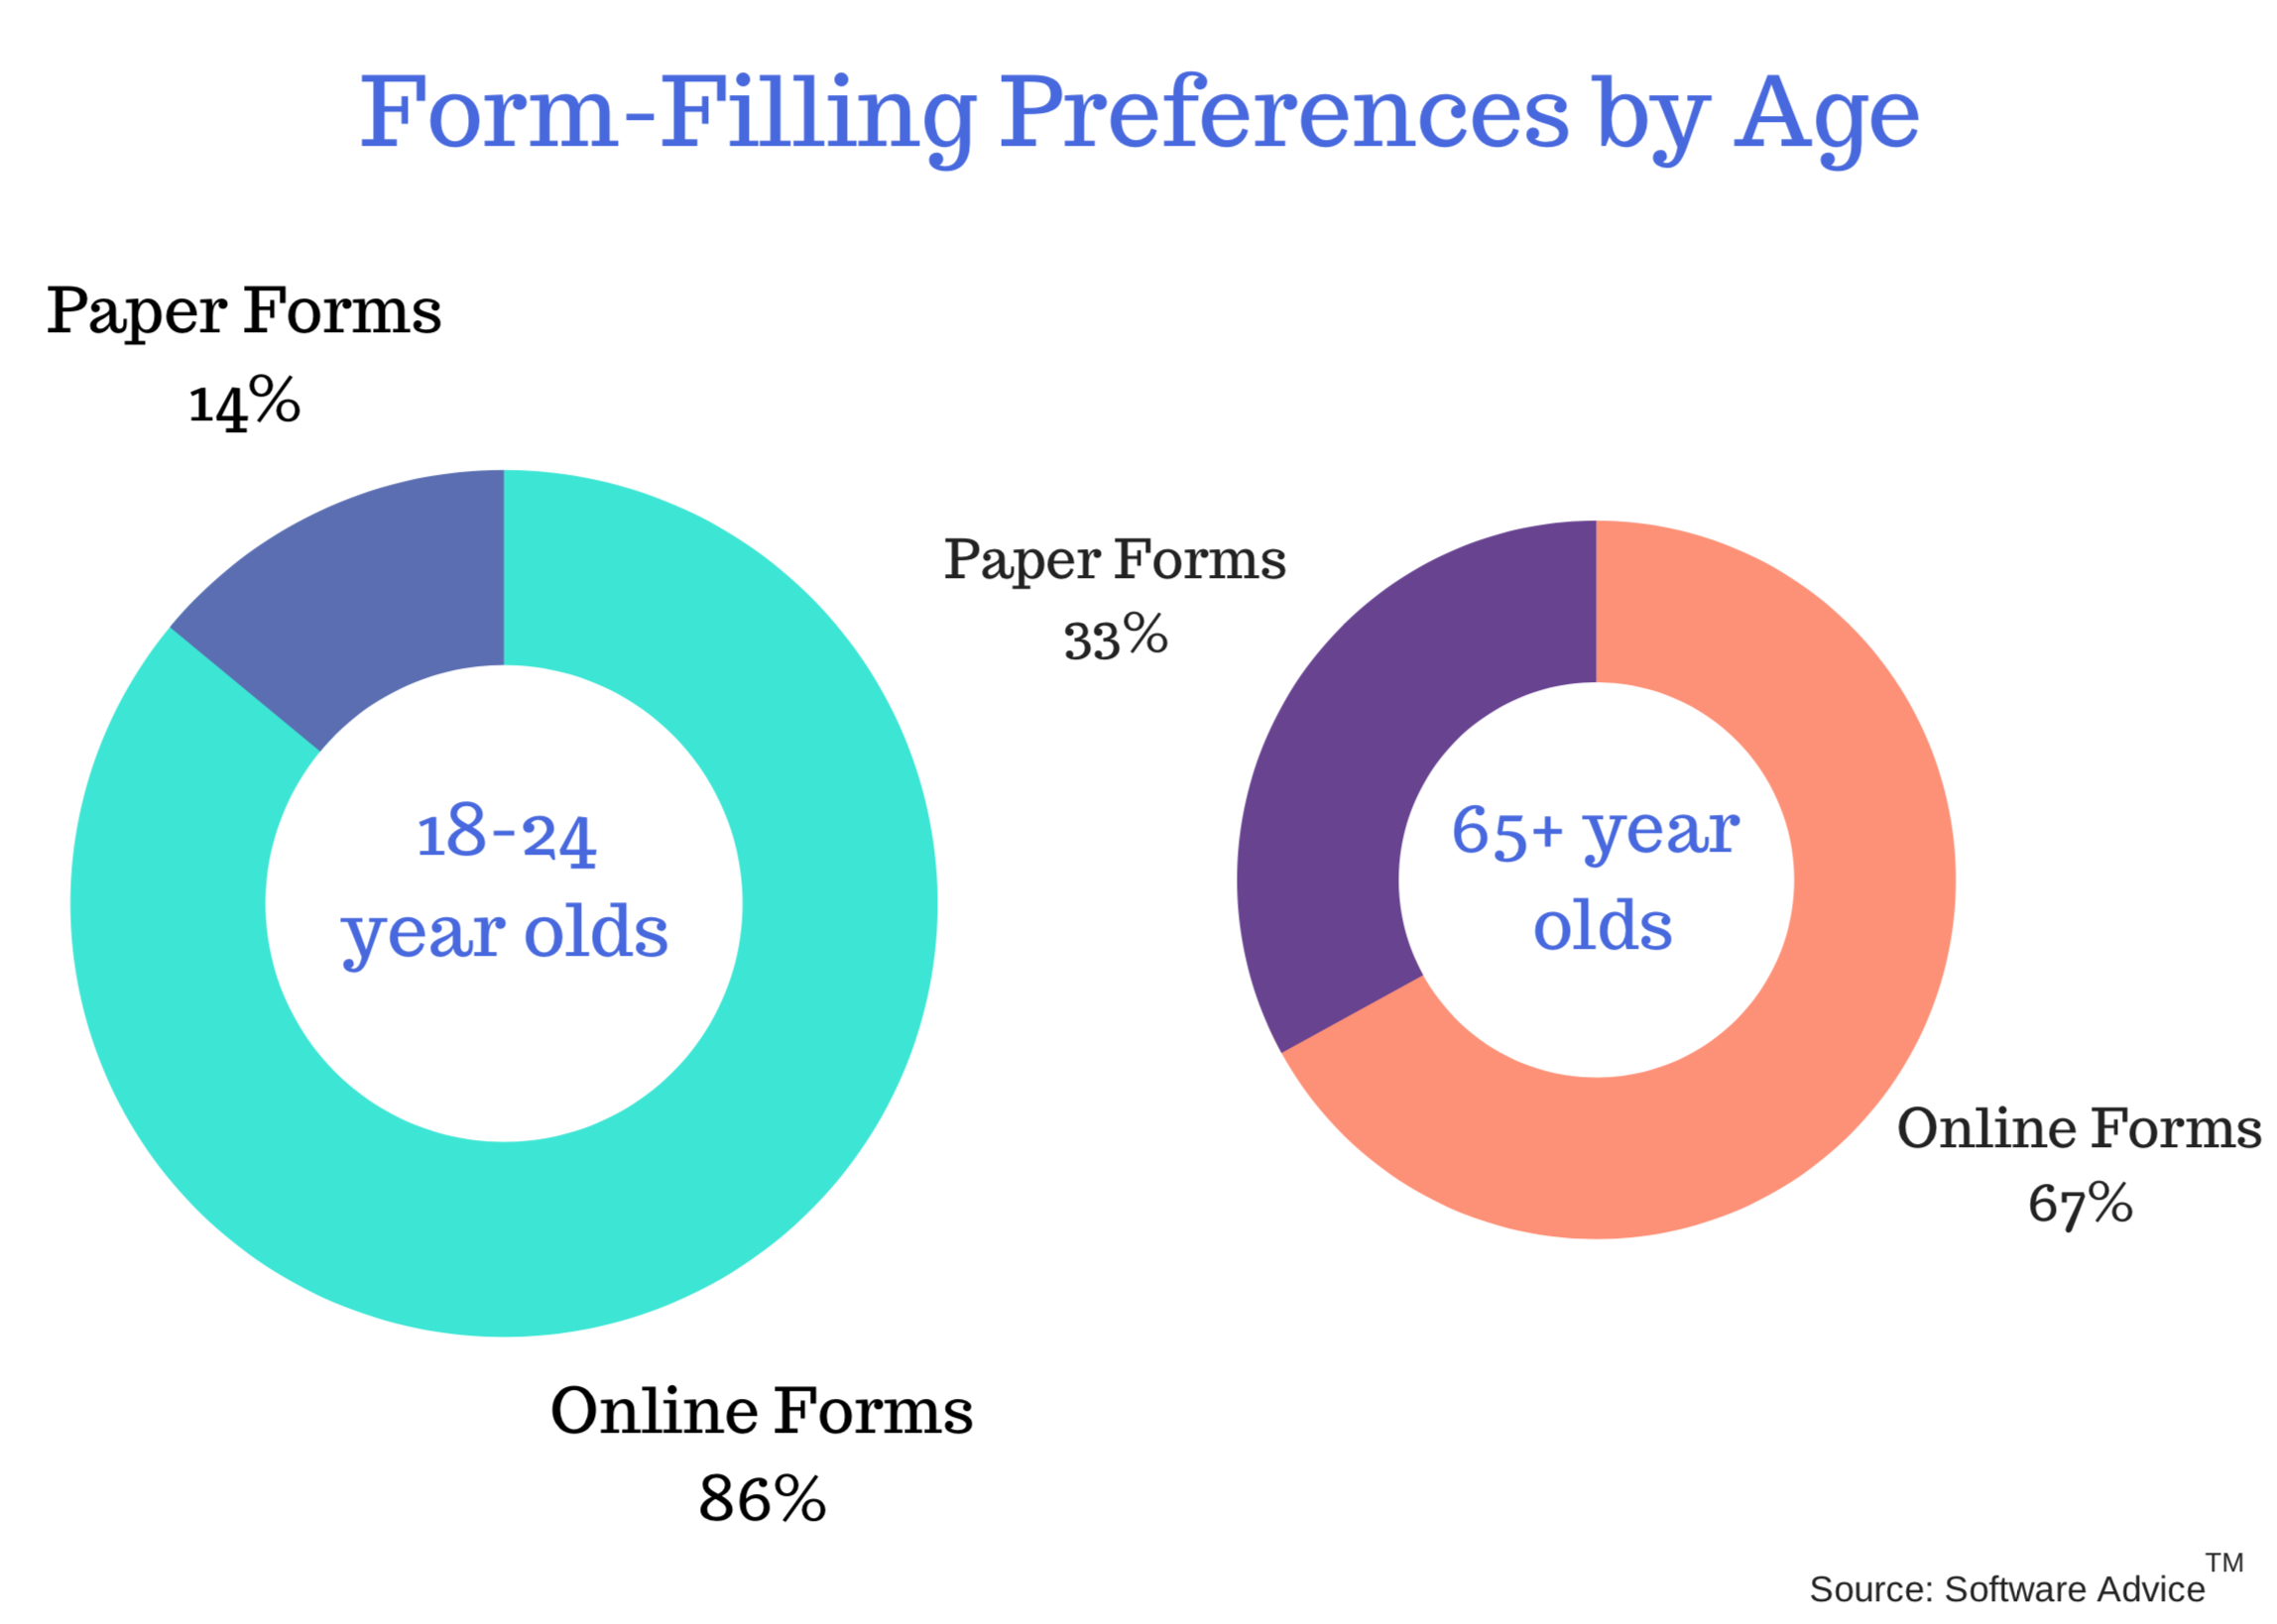 Majority users of all age groups prefer filling forms online.